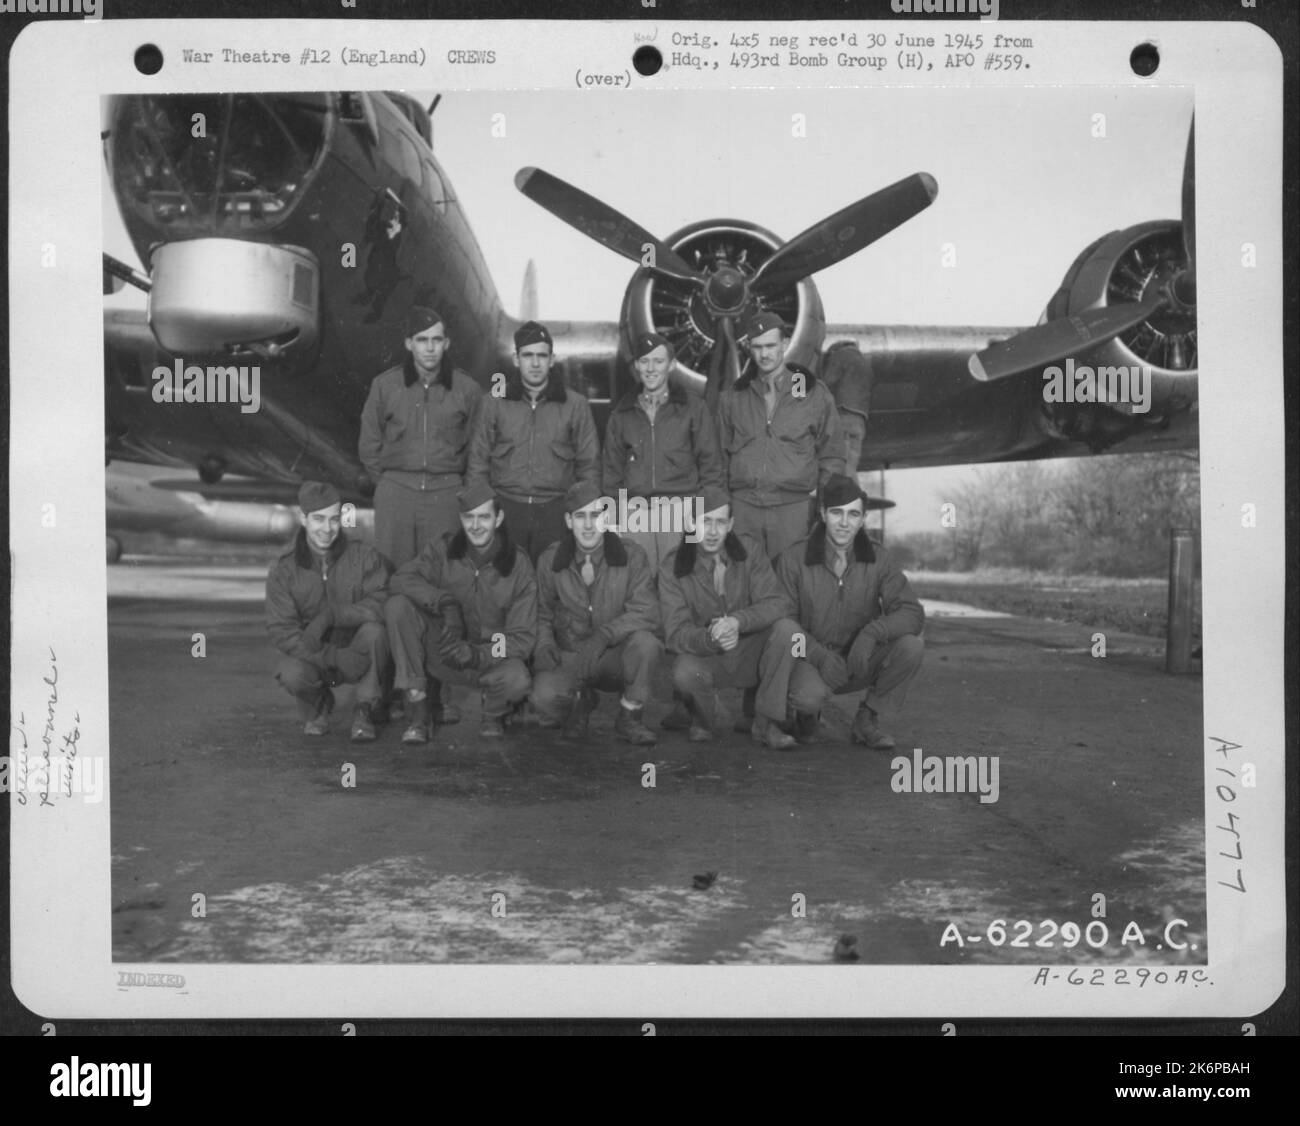 Lt. Terry And Crew Of The 493Rd Bomb Group, 8Th Air Force, In Front Of A Boeing B-17 Flying Fortress. 1 Jan. 1945, England. Stock Photo